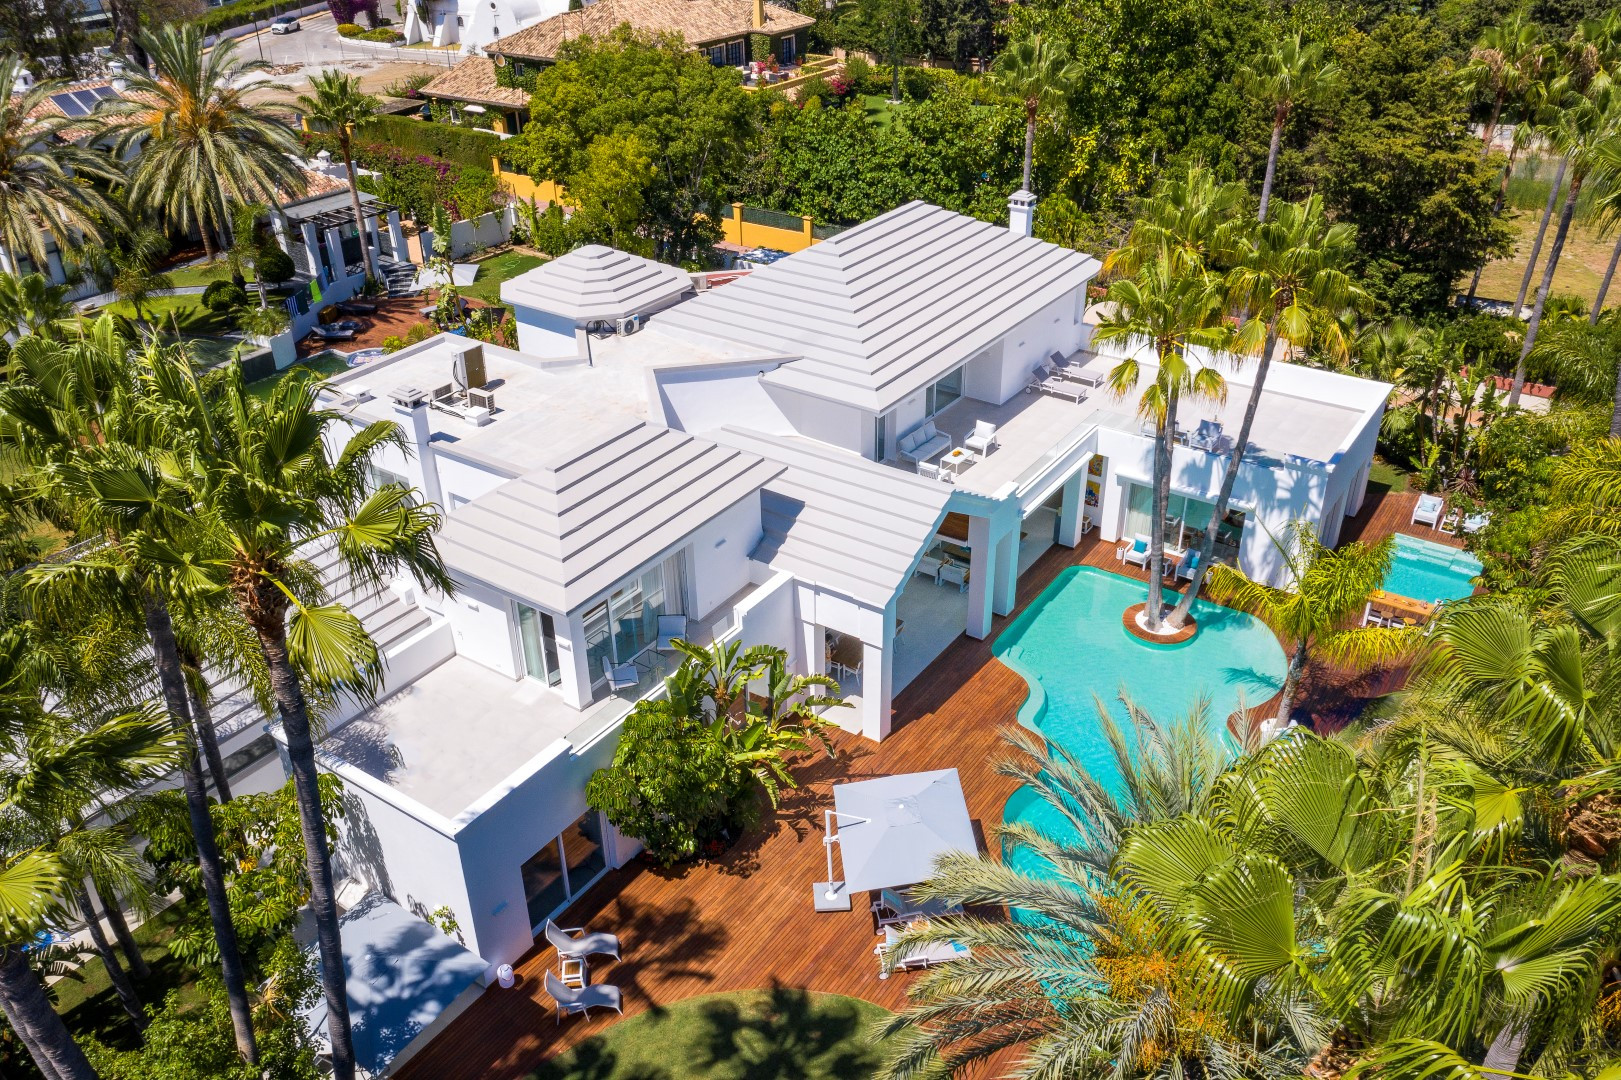 Mesmerising villa surrounded by palm trees in Costa del Sol